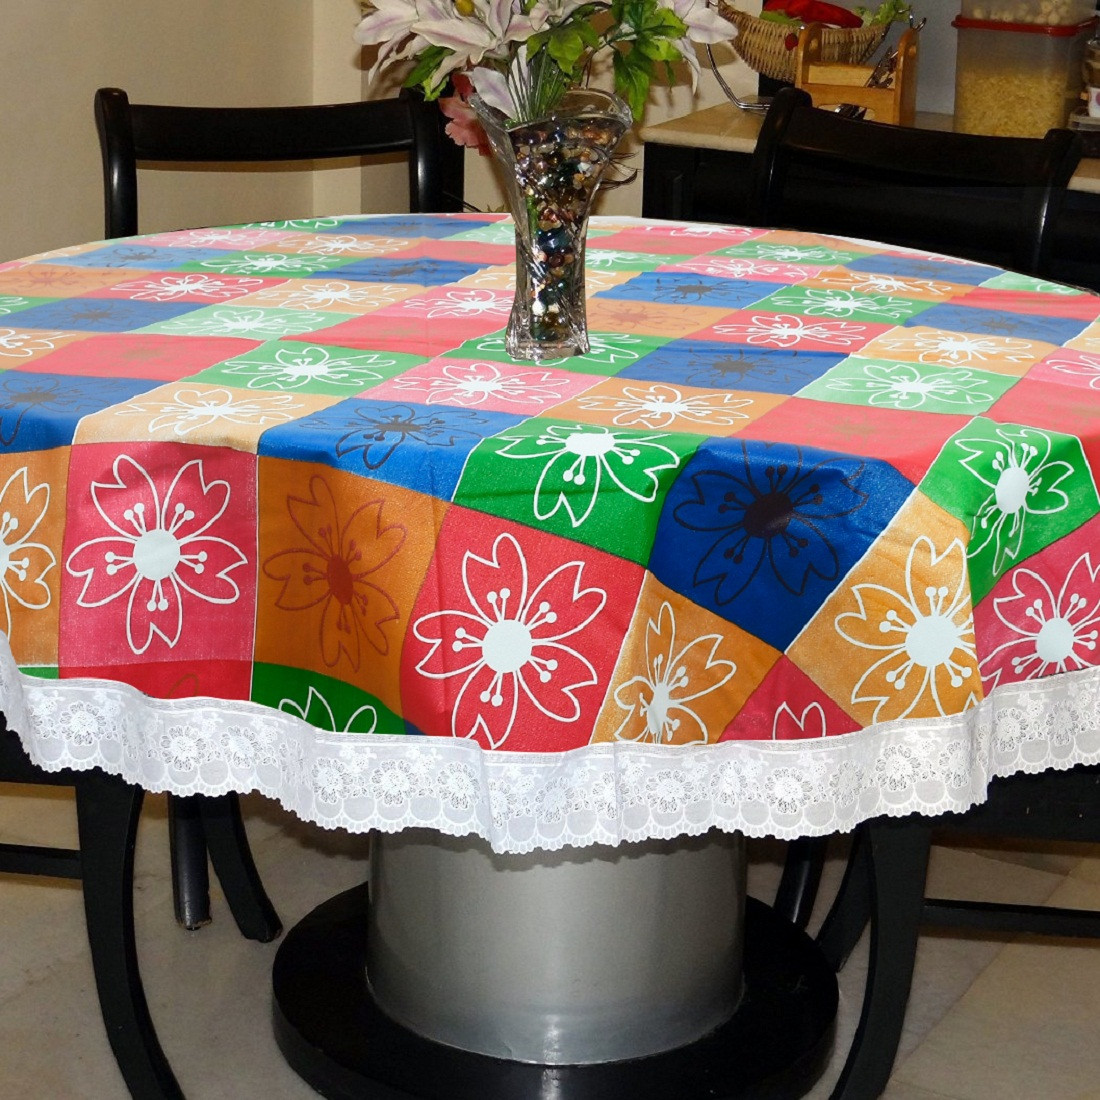 Kuber Industries Flower Print Round Table Cover 60 Inch-Waterproof PVC Resistant Spillproof PVC Fabric Table Cover for Dining Room Kitchen Party (Multi)-KUBMRT11819